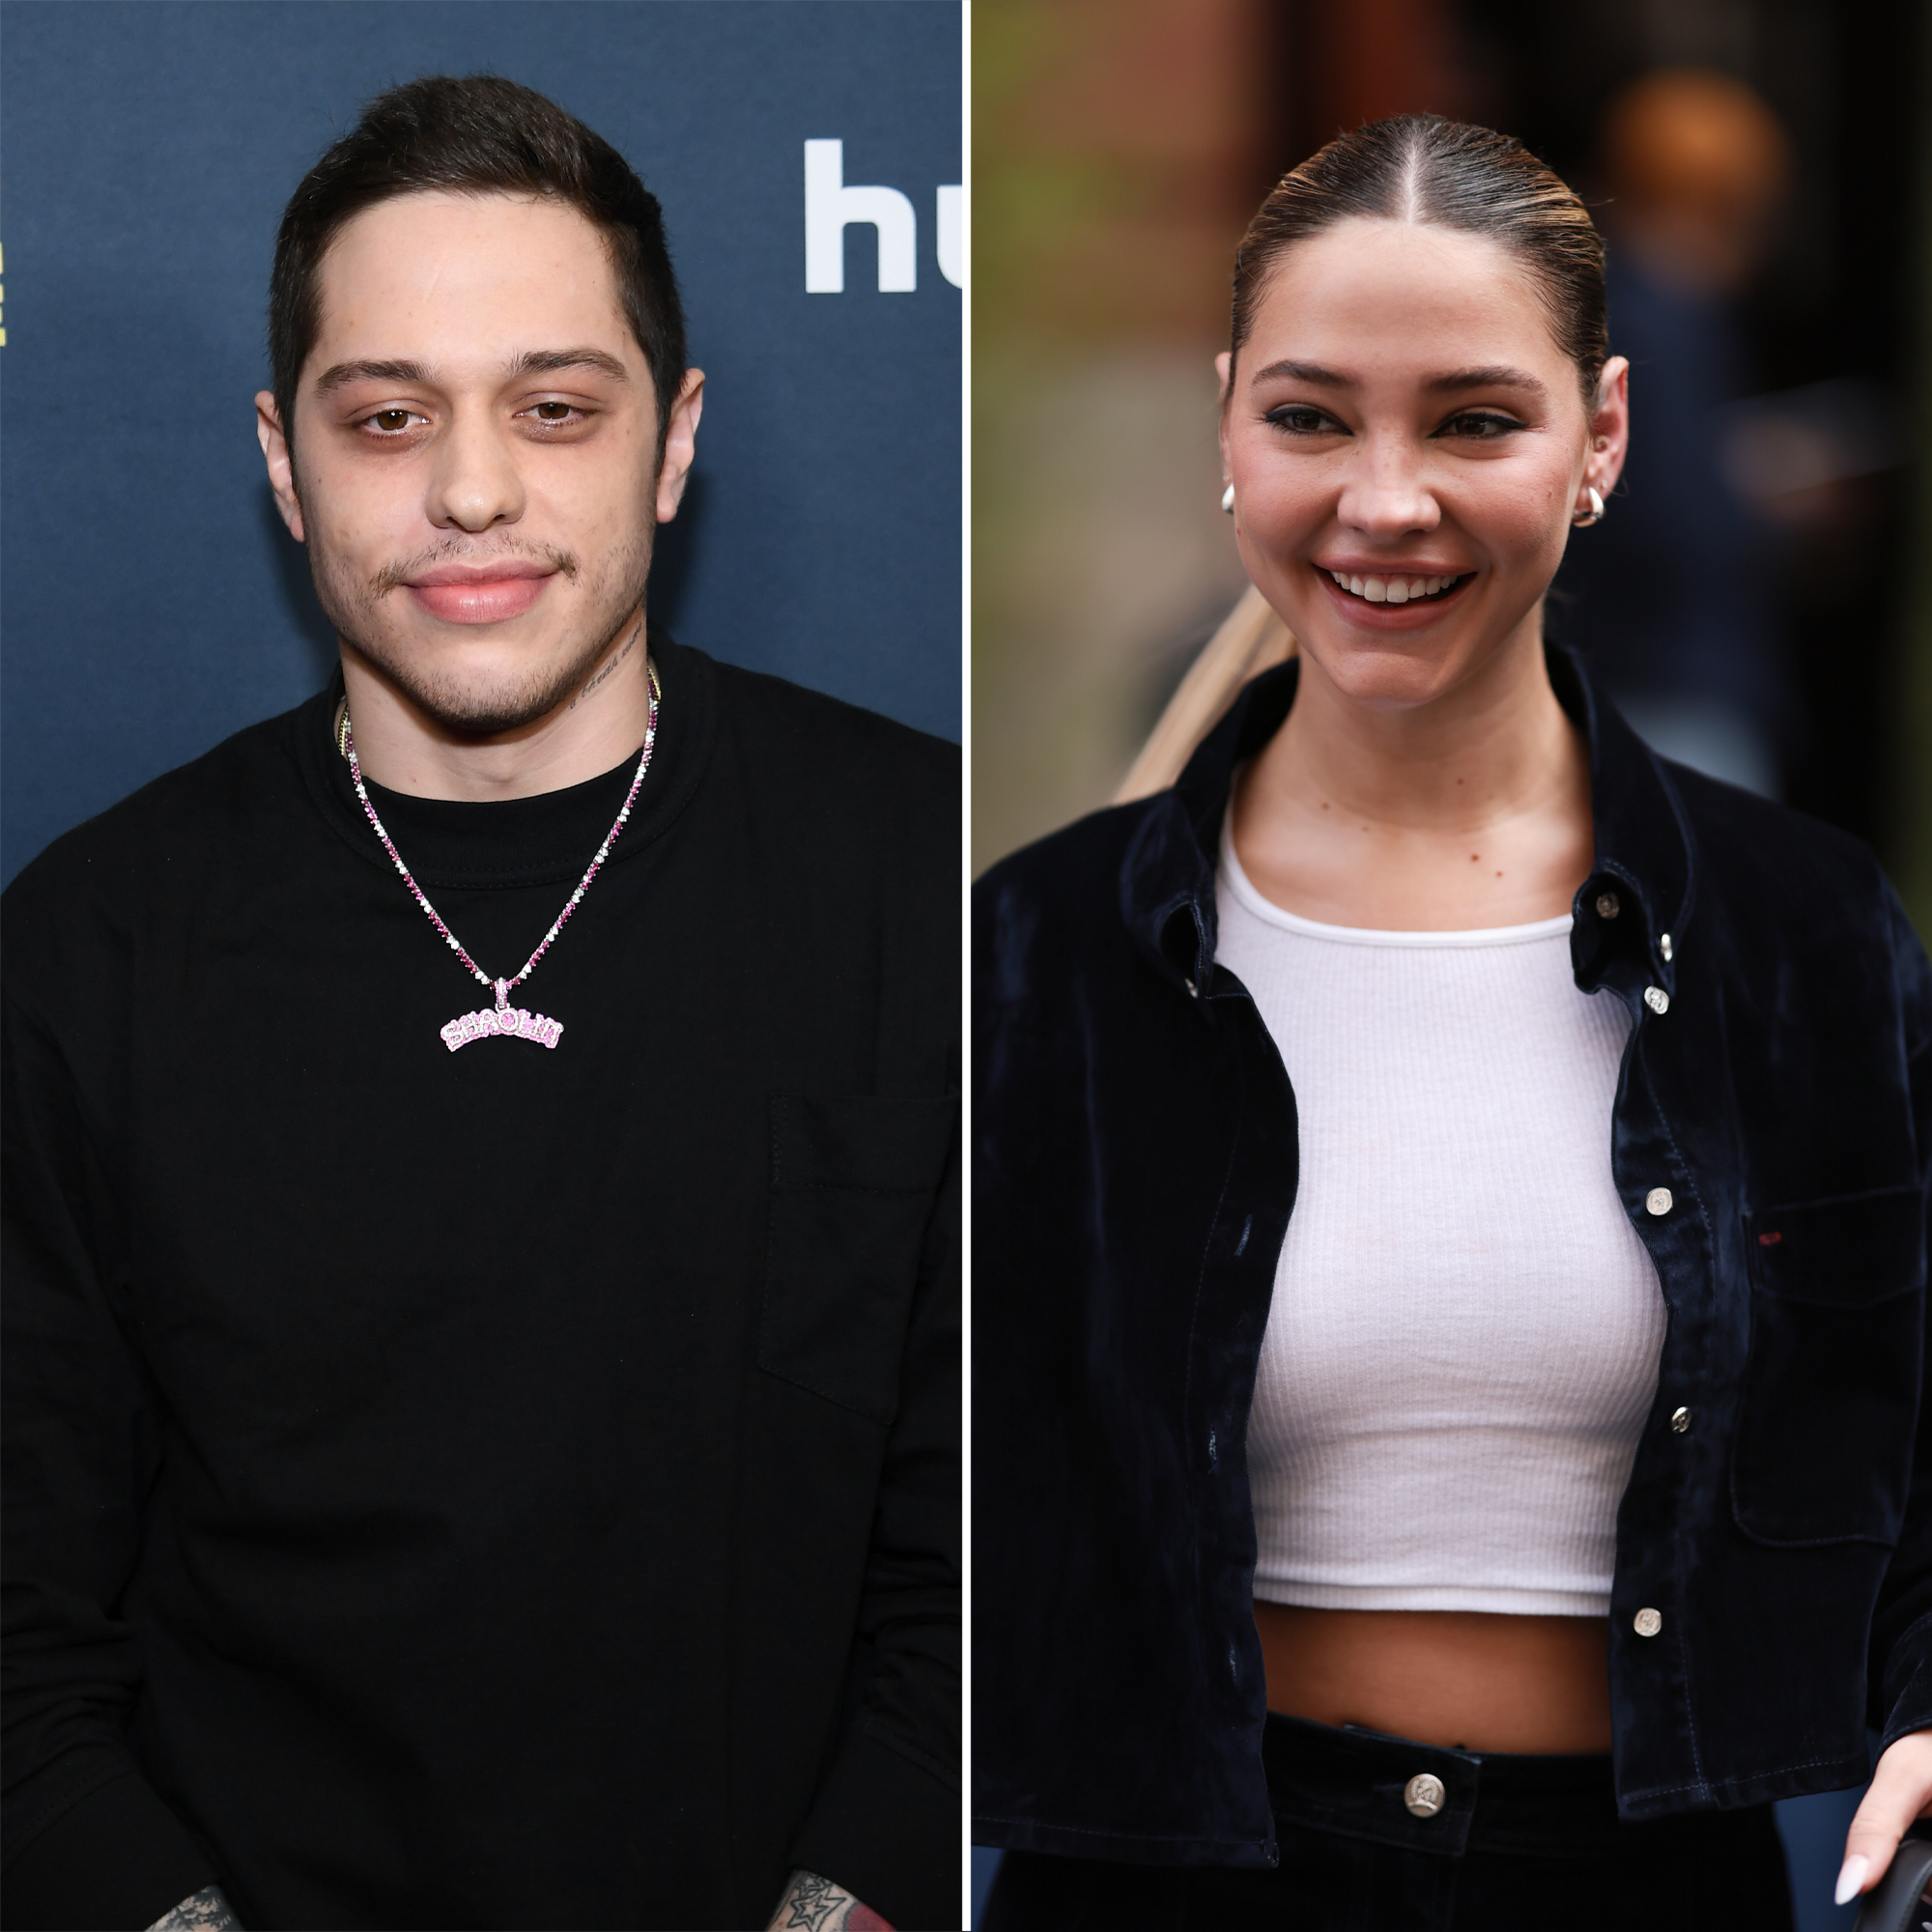 Pete Davidson and Madelyn Clines Surprise Romance Developed Quickly image